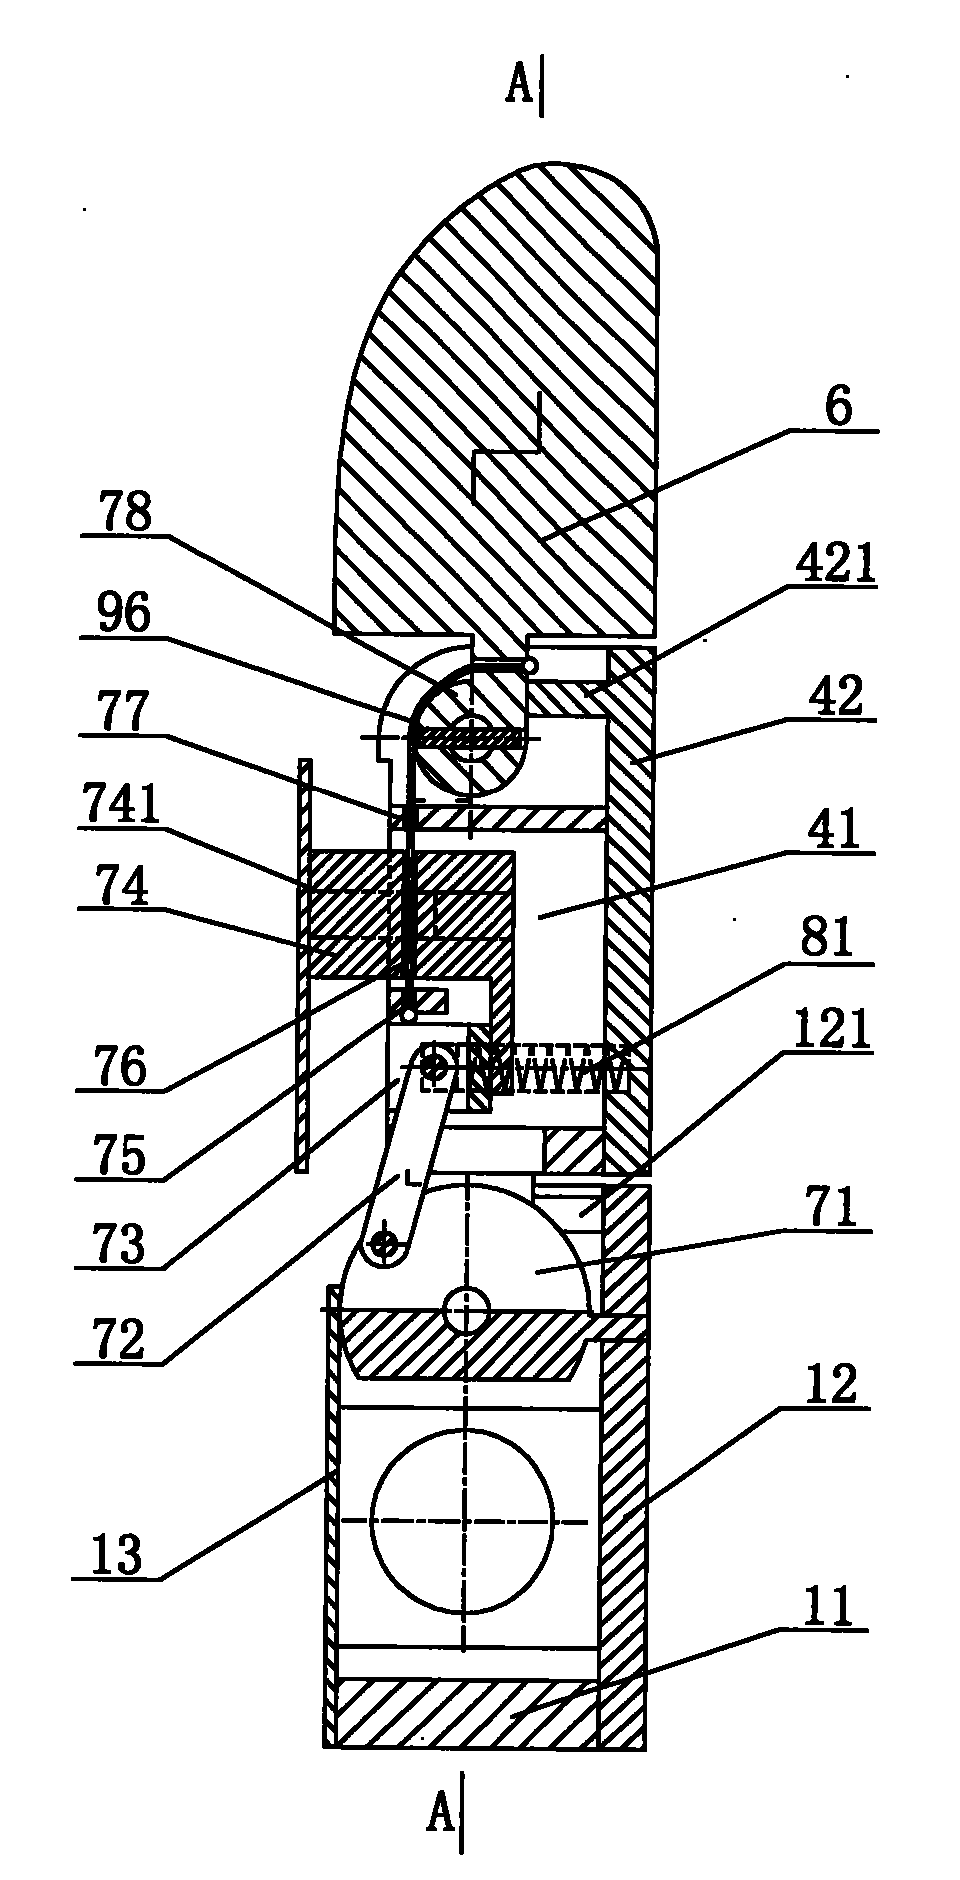 Crank block type flexible piece parallel coupled under-actuated finger device